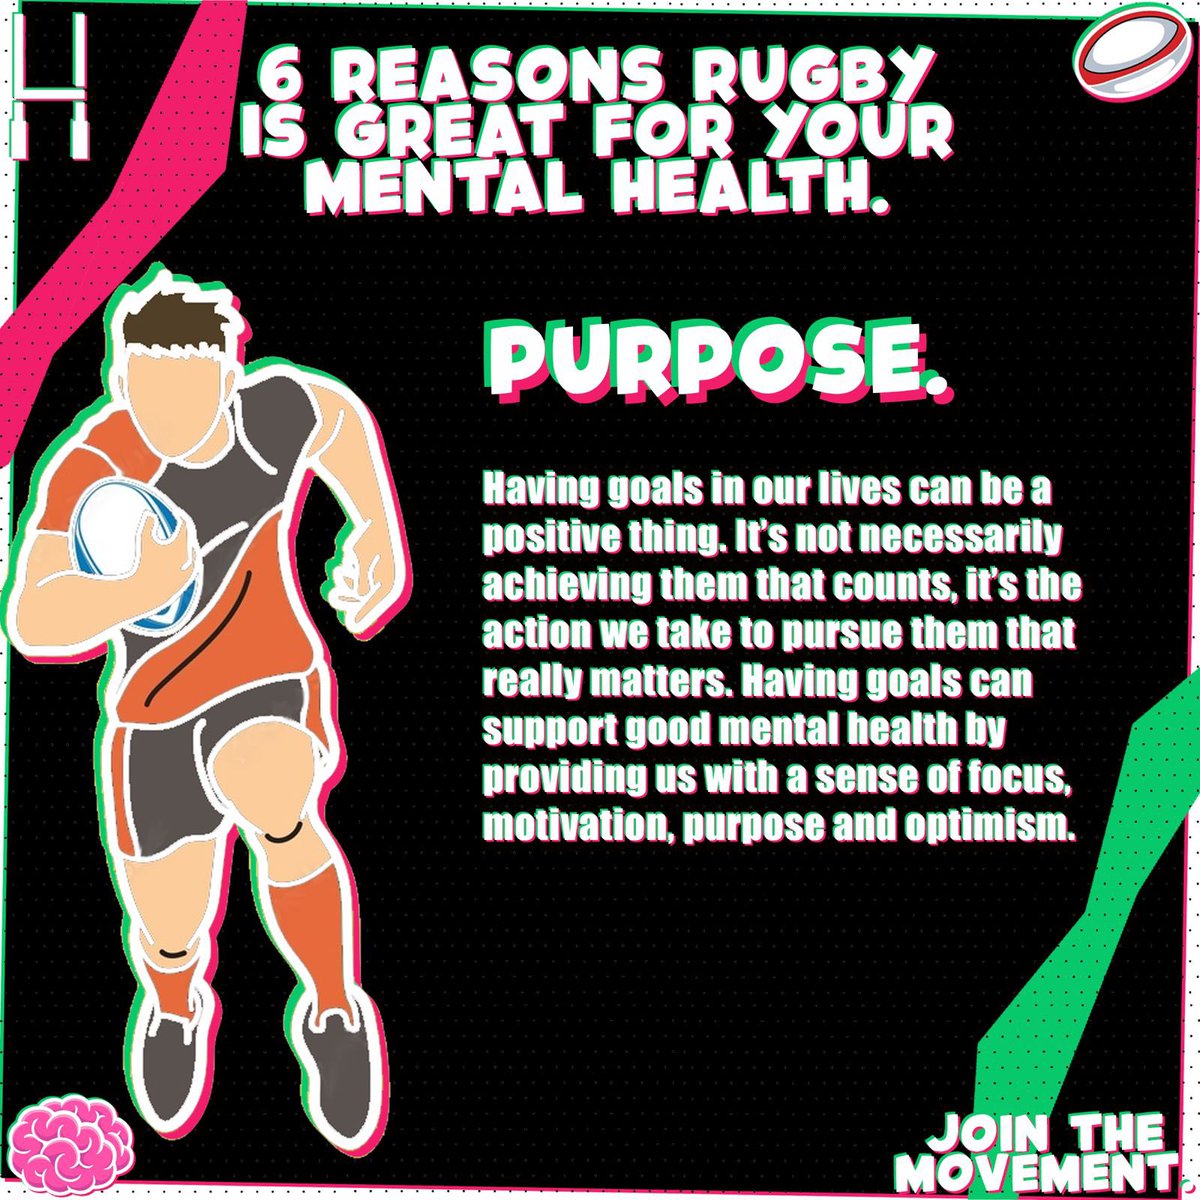 𝗣𝗨𝗥𝗣𝗢𝗦𝗘 💚 In a rugby club, you are always working towards a shared purpose. It might be learning a new play, or challenging for silverware; but whatever the goal, having something to focus on is a great way to develop our mental fitness 🤝 #TackleTheStigma 🗣️